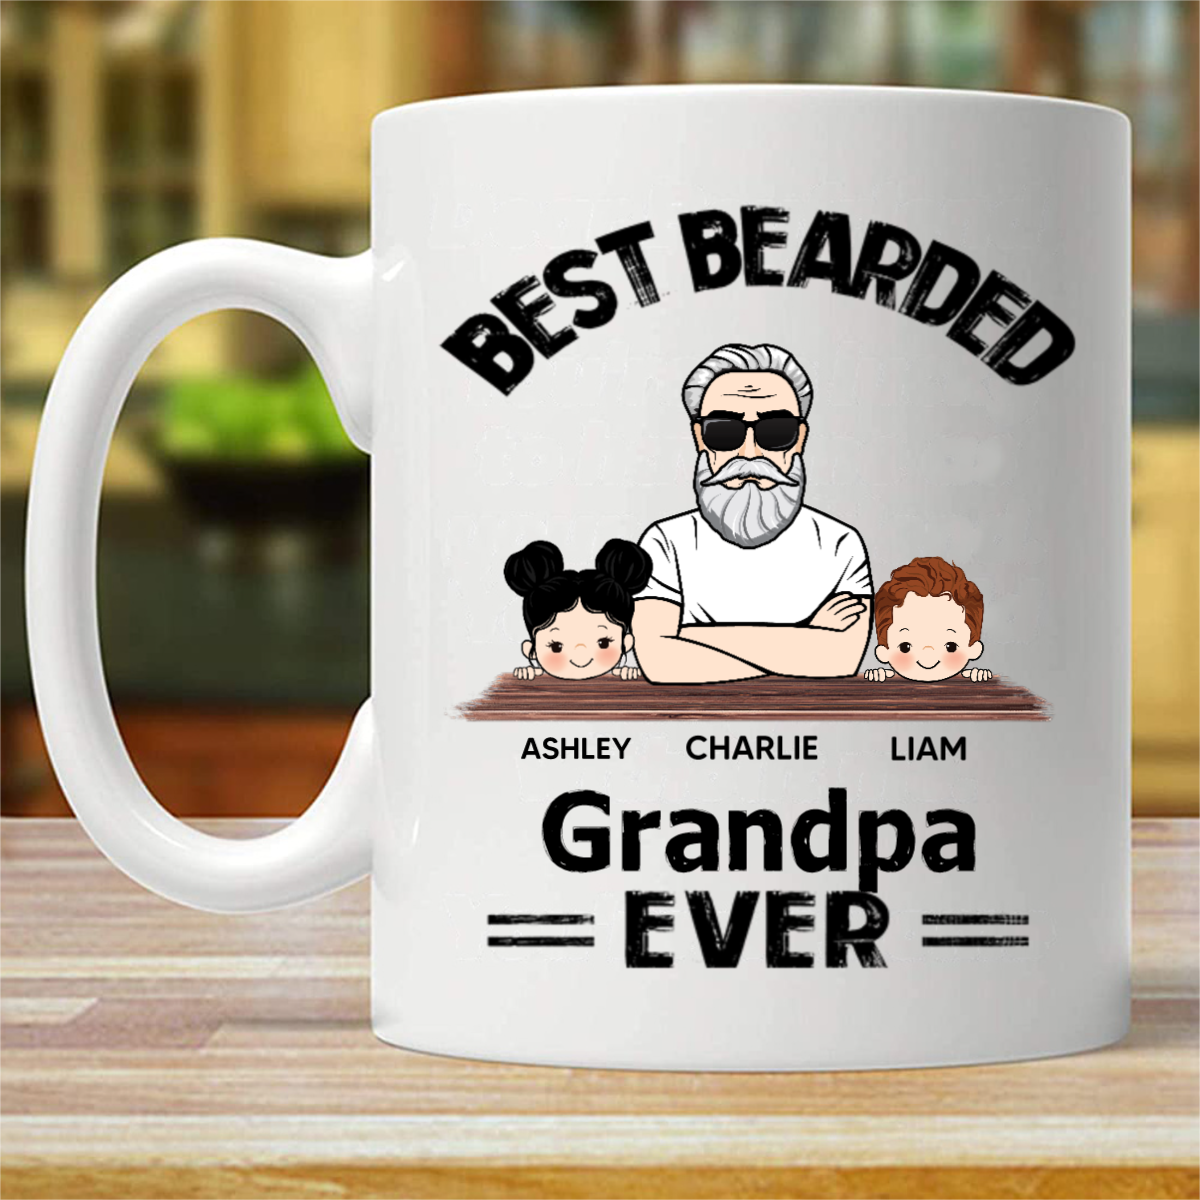 Best Bearded Dad Grandpa Ever Personalized Mug (Double-sided Printing)